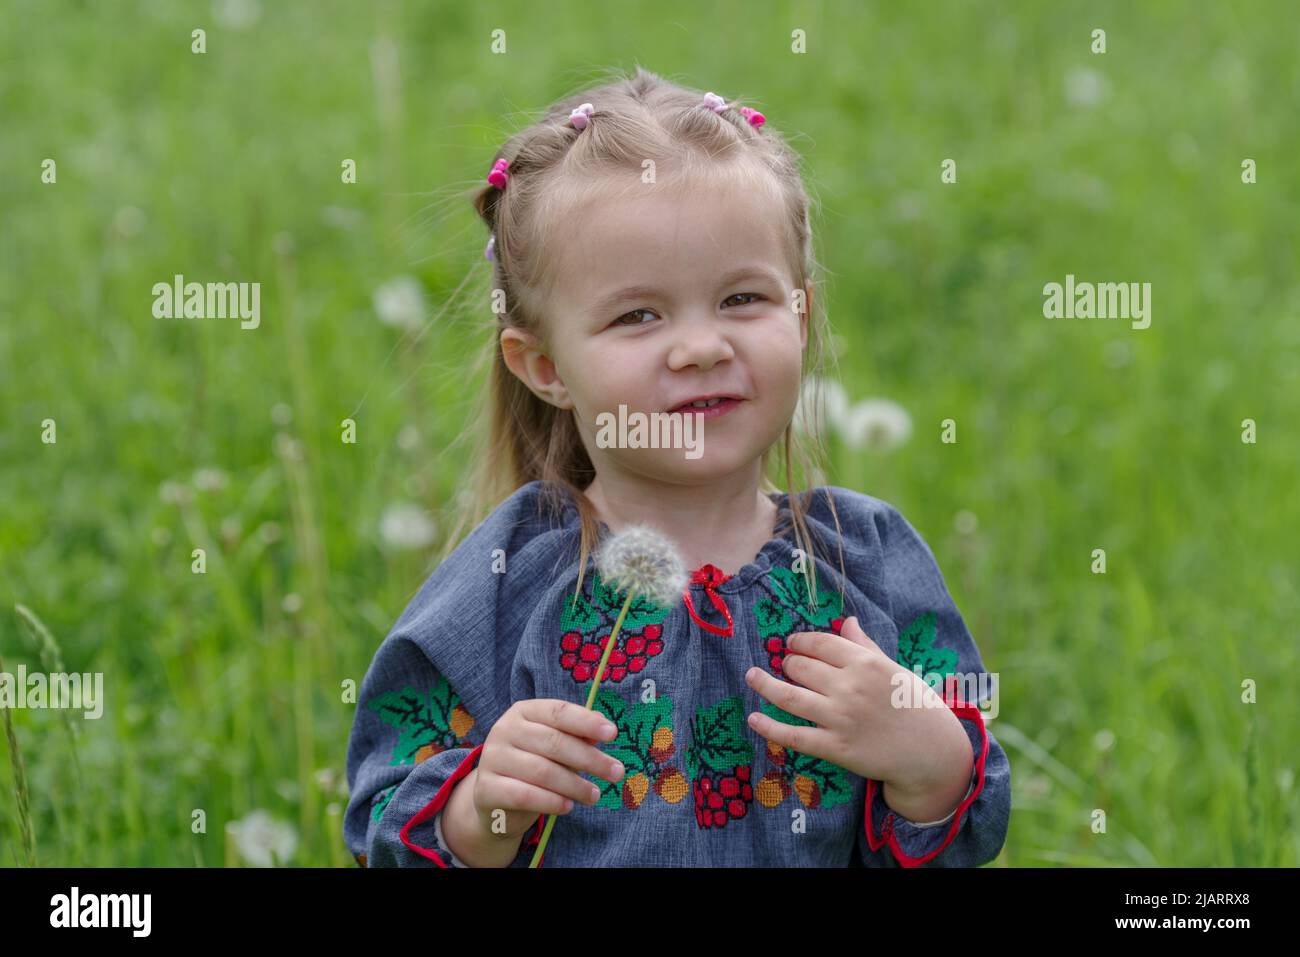 2 years old Caucasian girl picking a dandelion Stock Photo